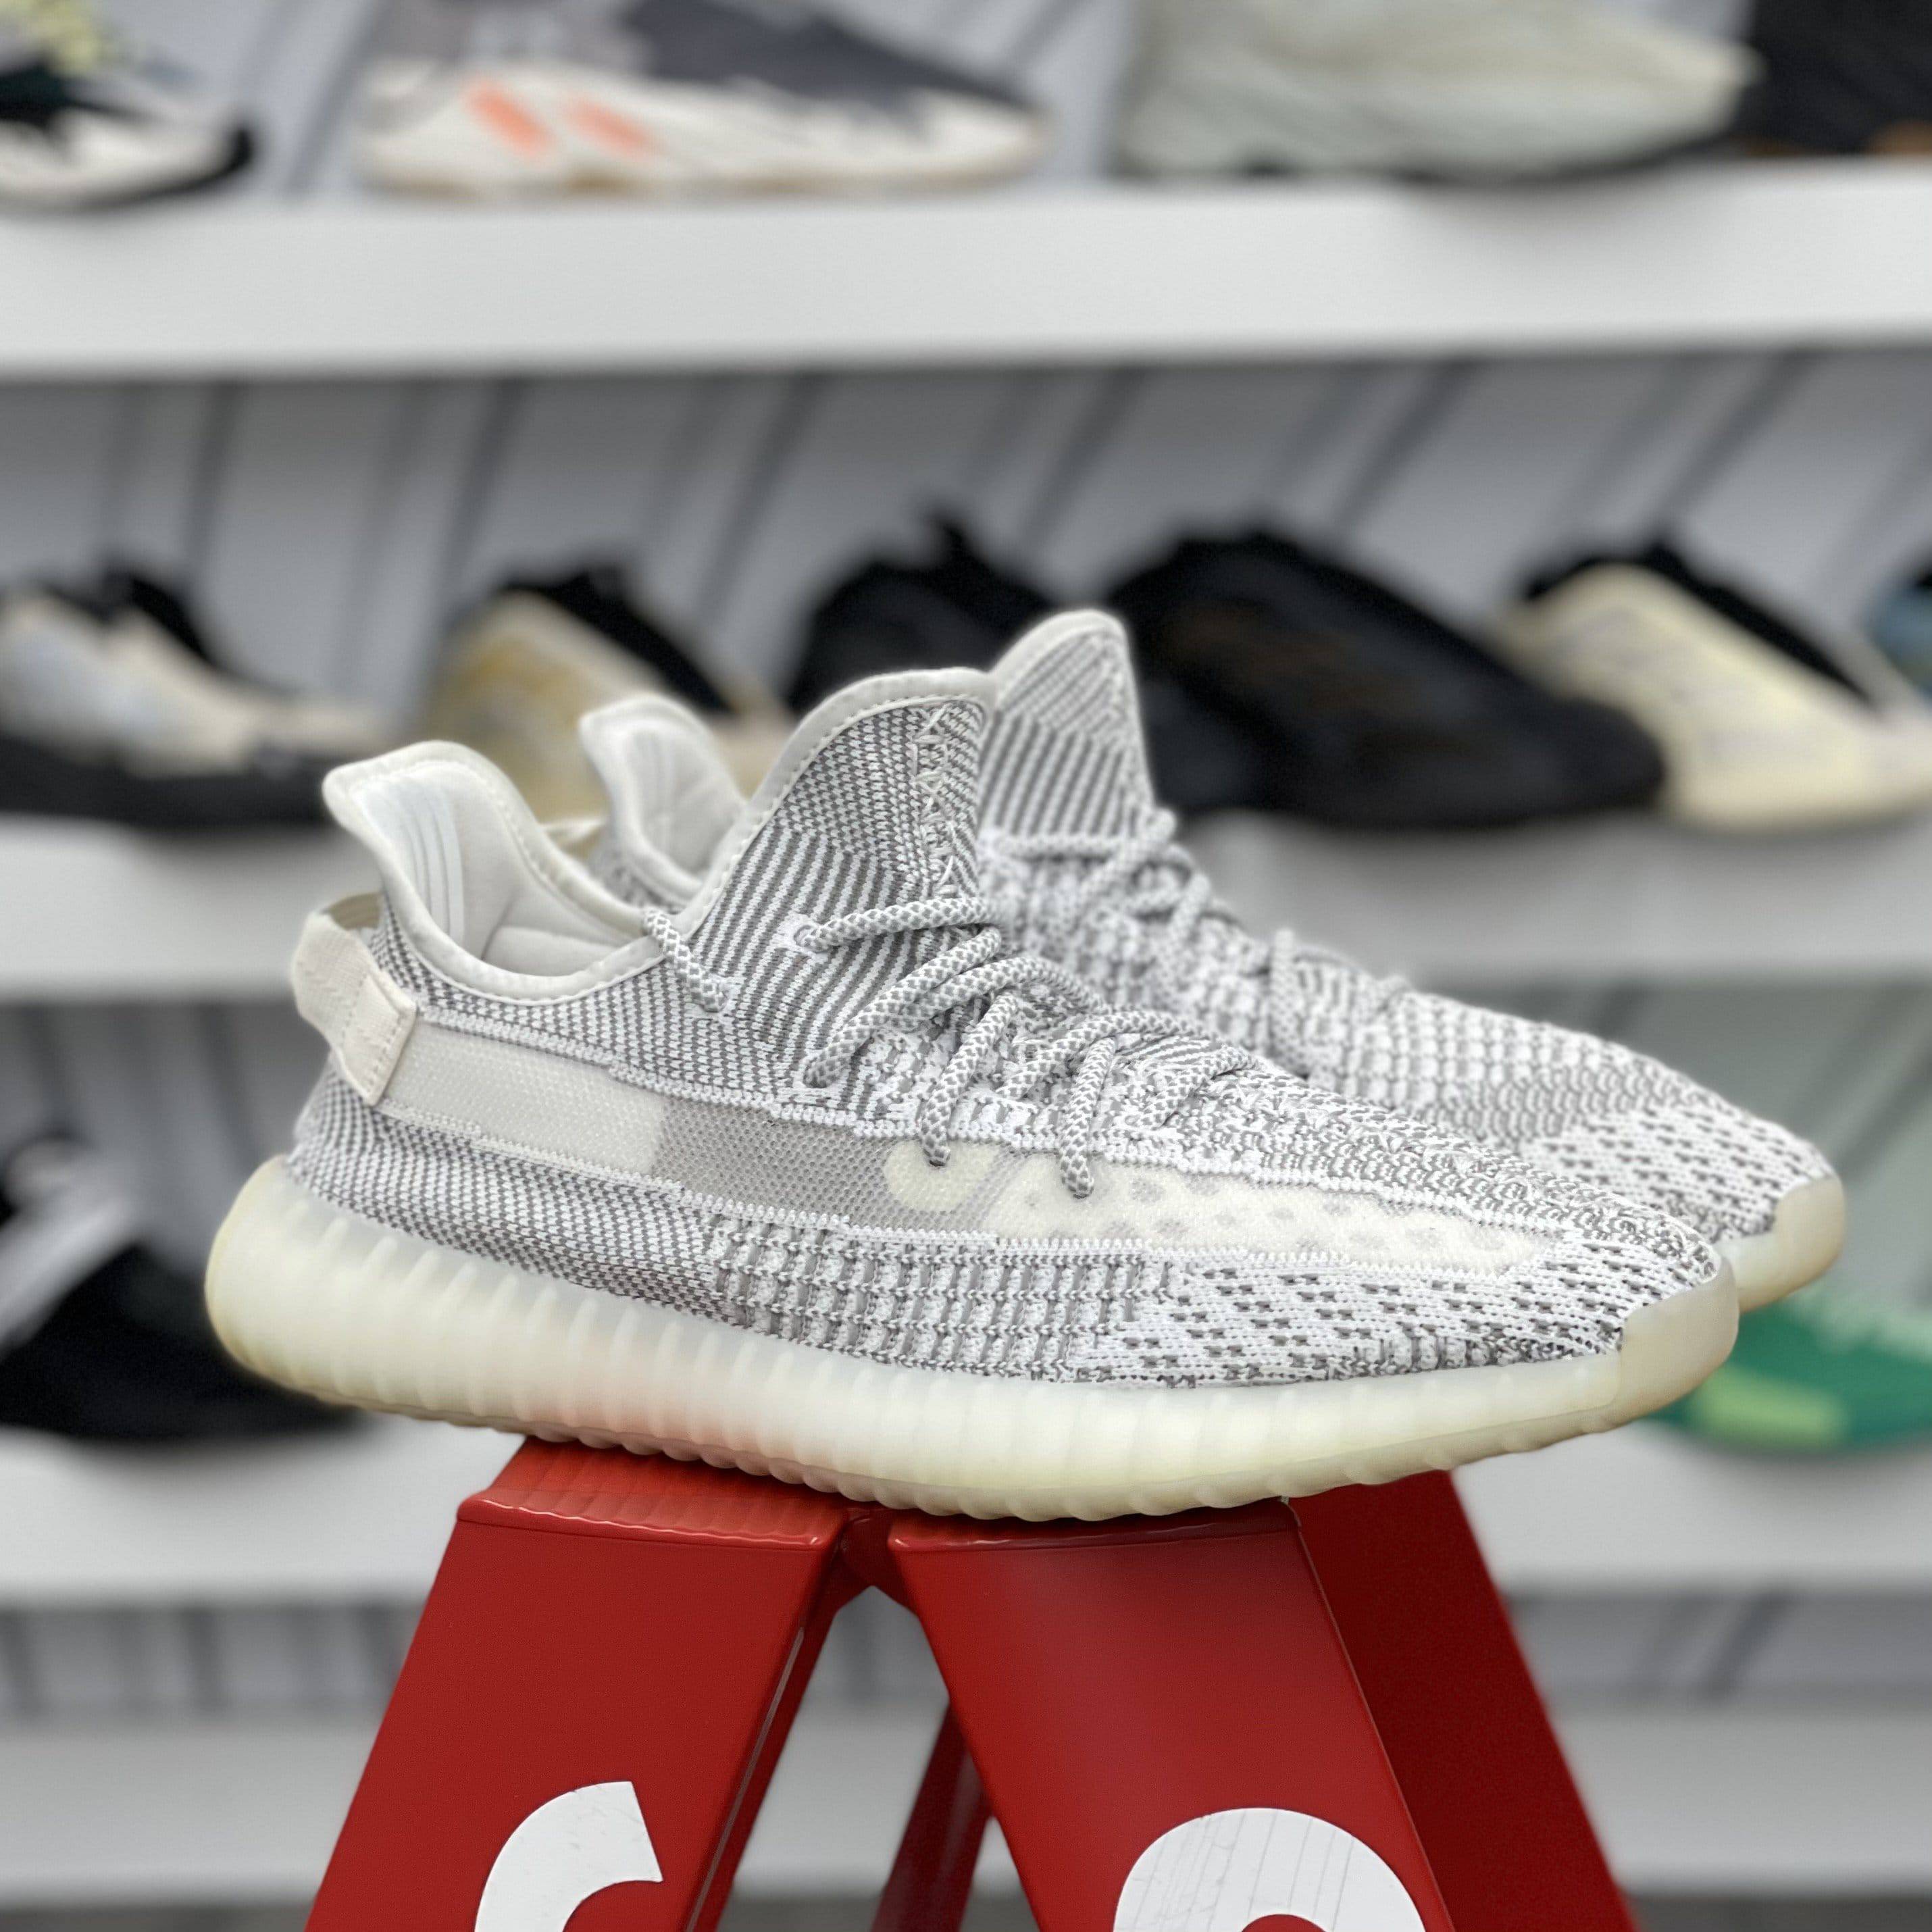 Yeezy x Adidas Off-White Knit Fabric Boost 350 V2 Butter Sneakers